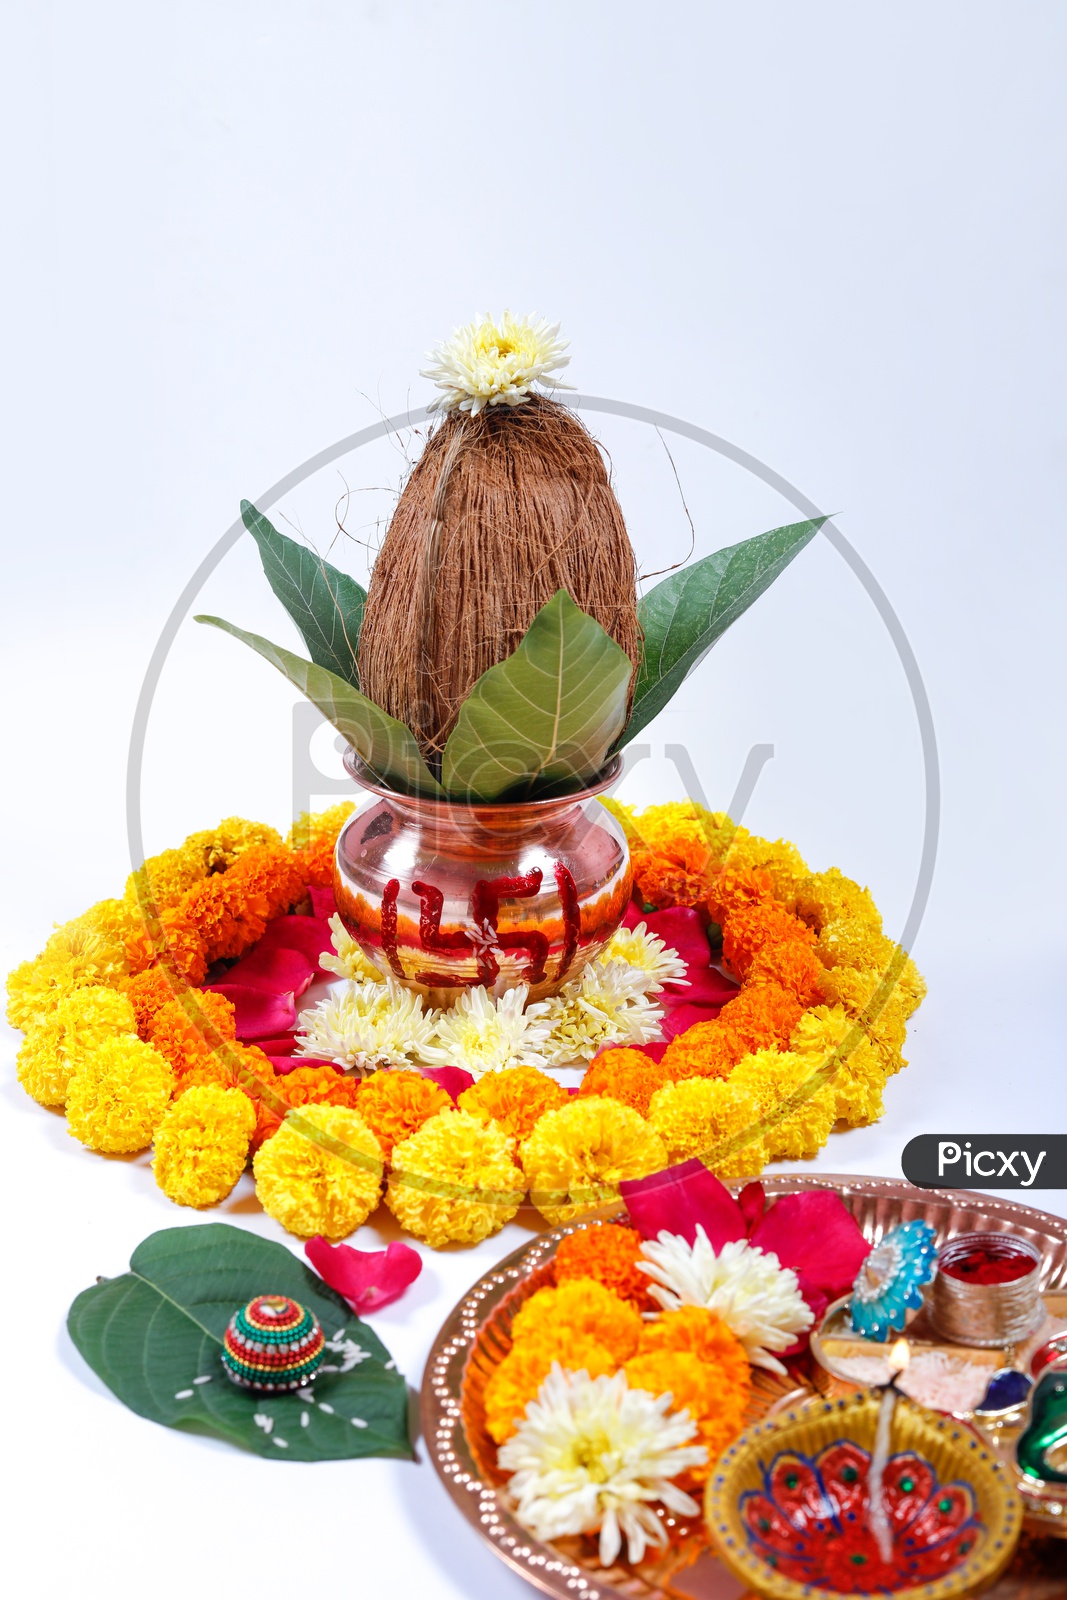 Kalisam decorated with Marigold Flower for Pooja & Thalli. Indian traditions/rituals